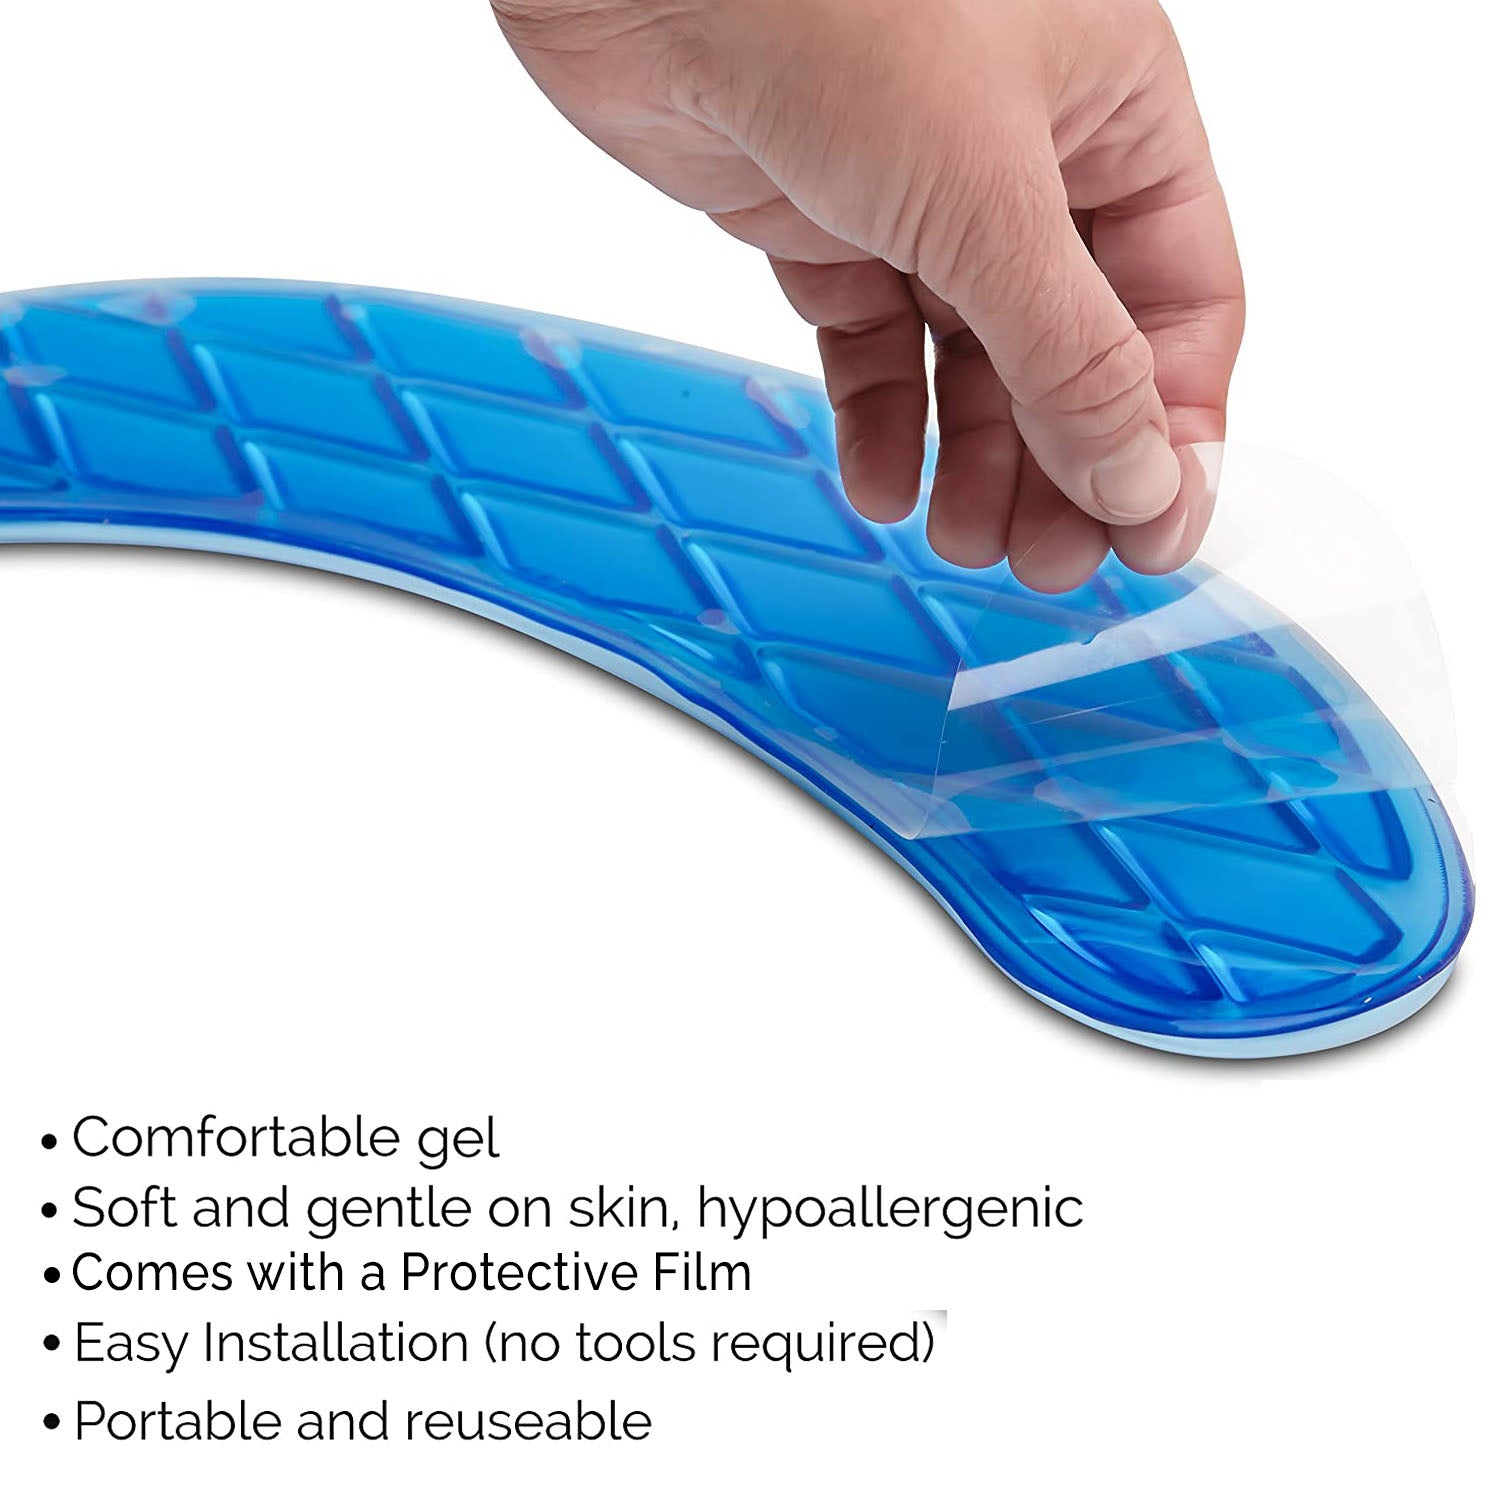 Washable Adhesive Gel Toilet Seat Cover, Maximum Pain Relief, Blue, Elongated - Medvat